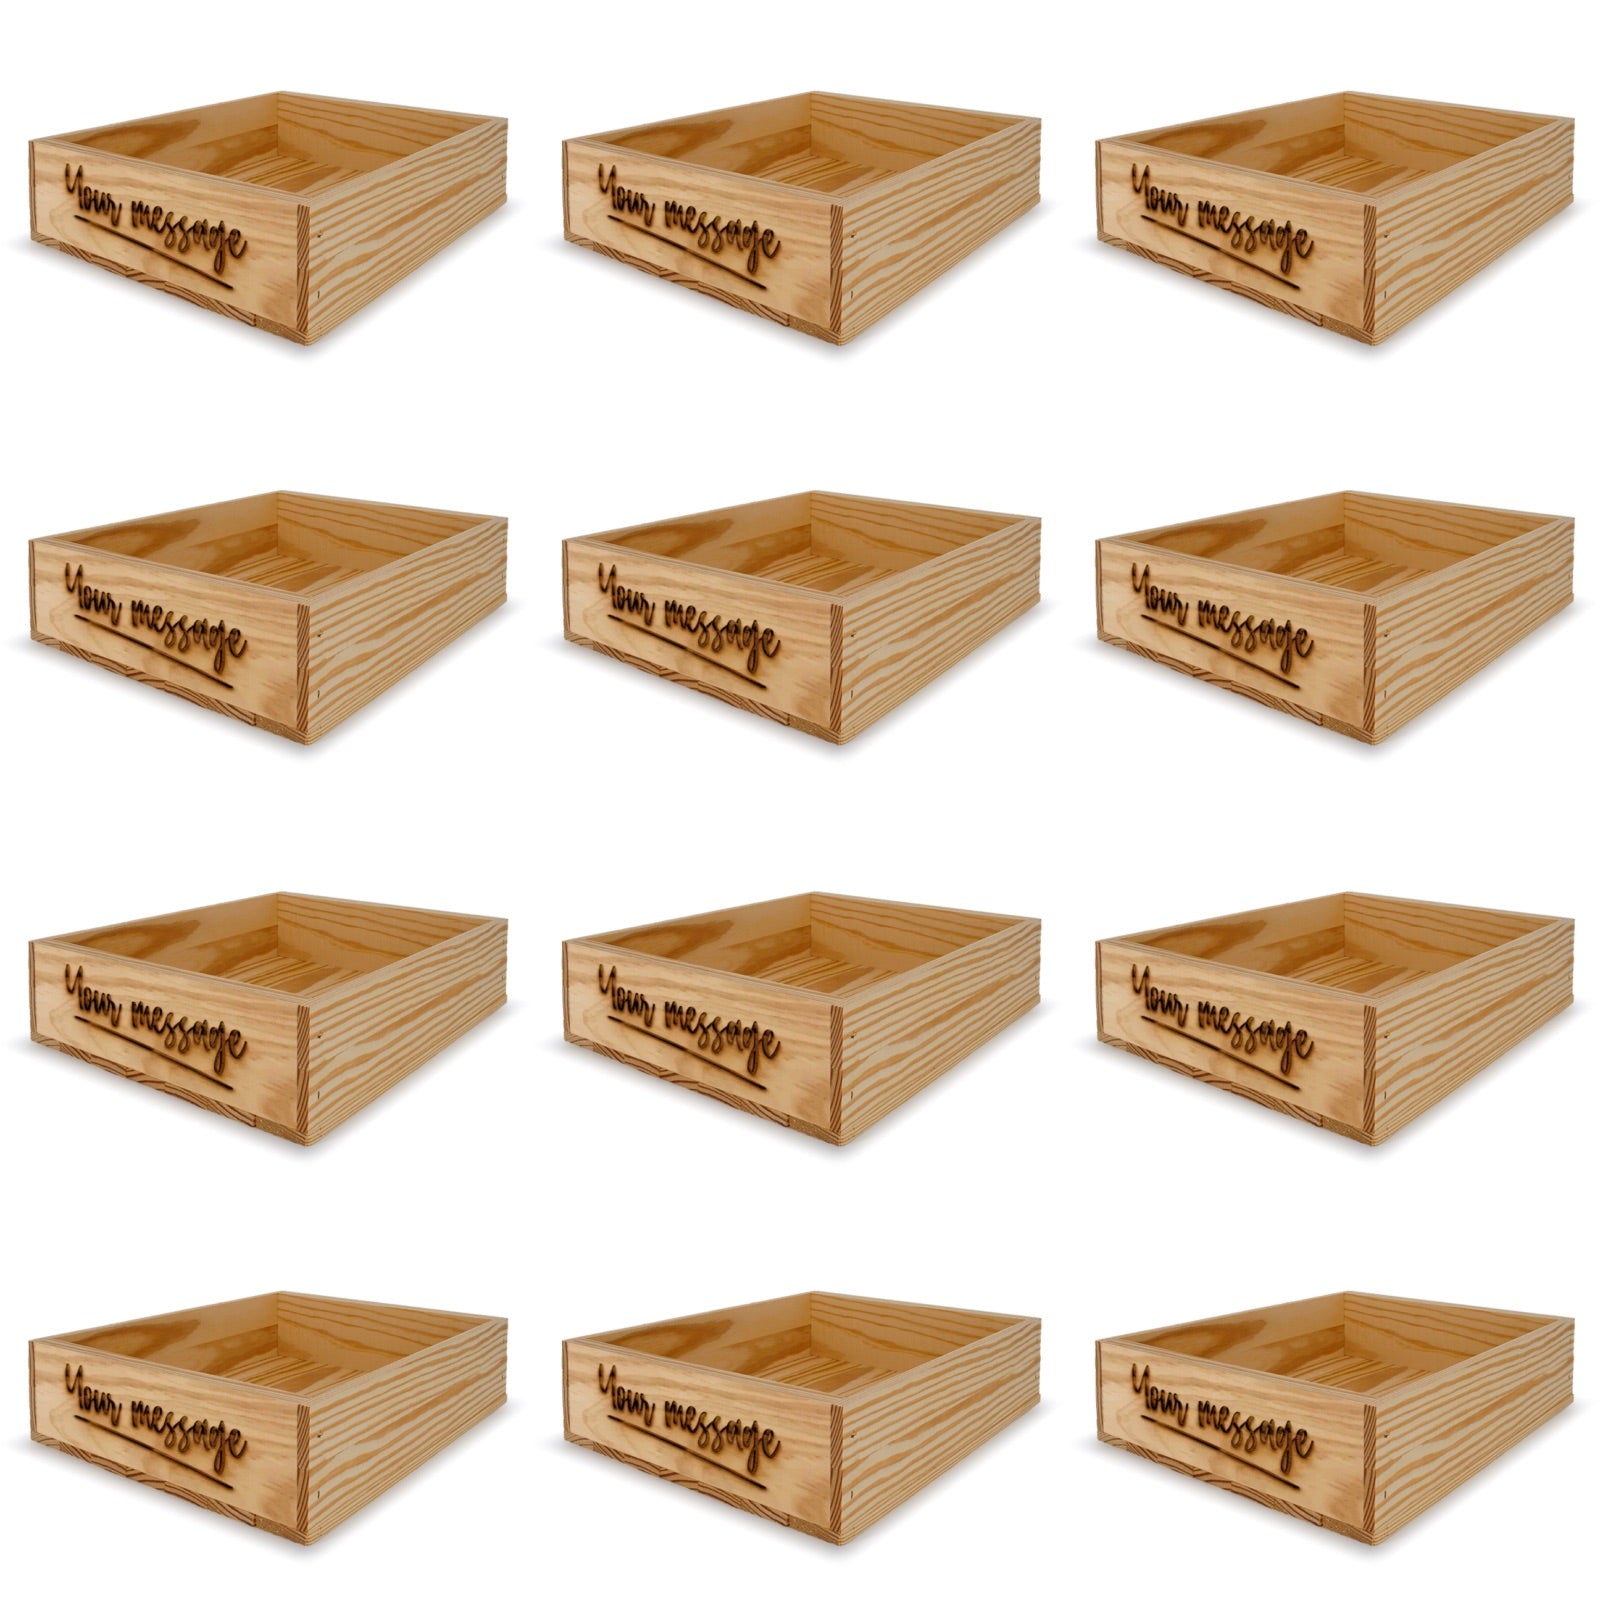 12 Small wooden crates with custom message 14x11.5x3.5